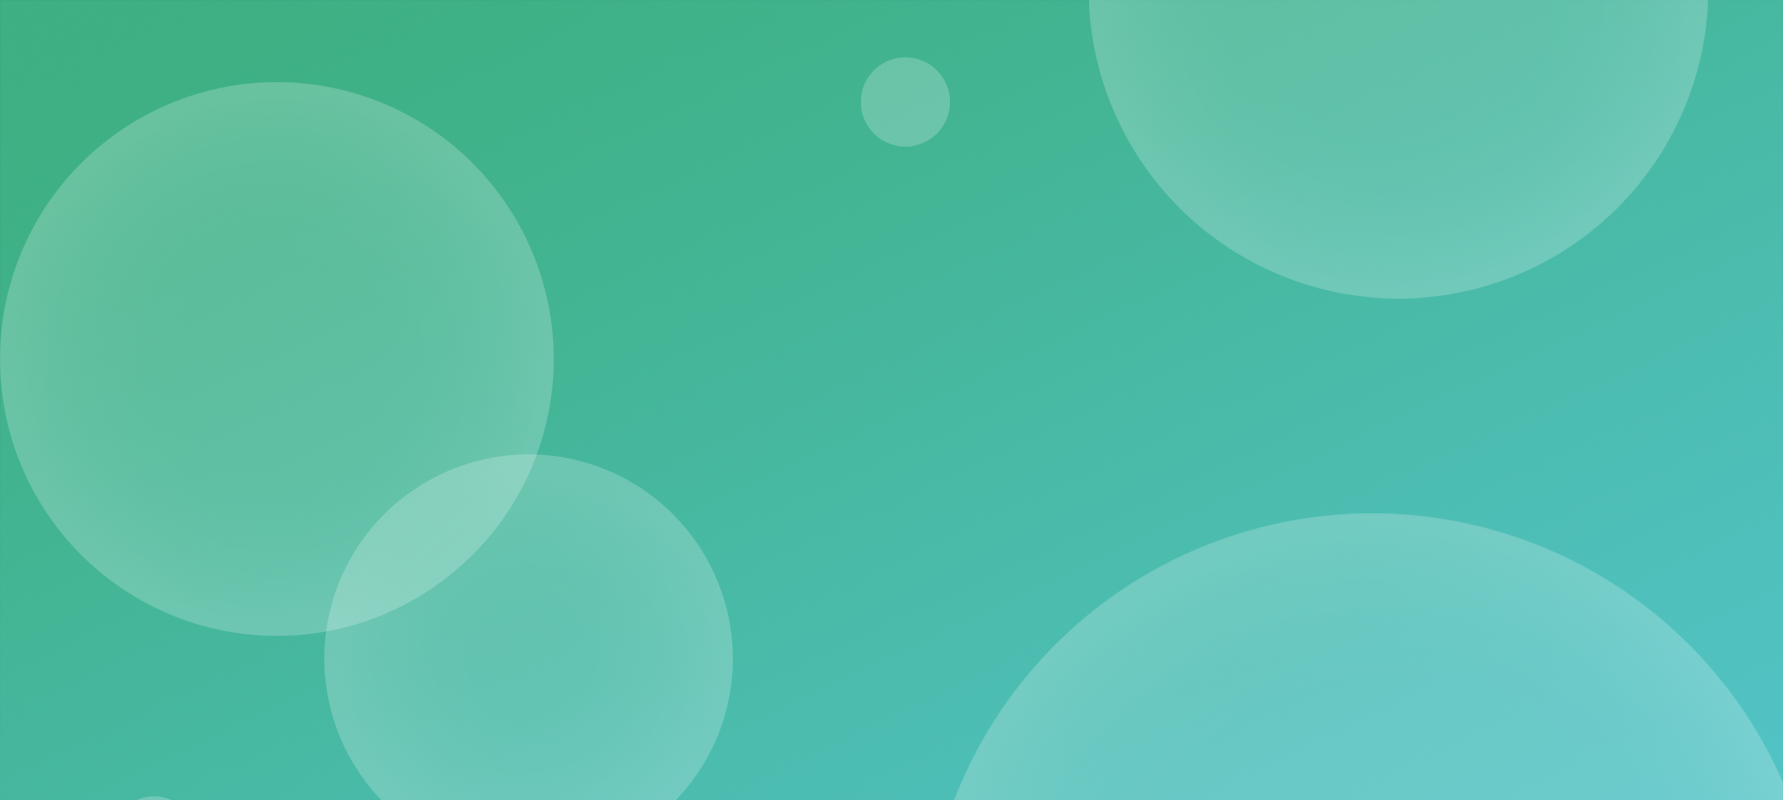 A green and blue background with circles on it.